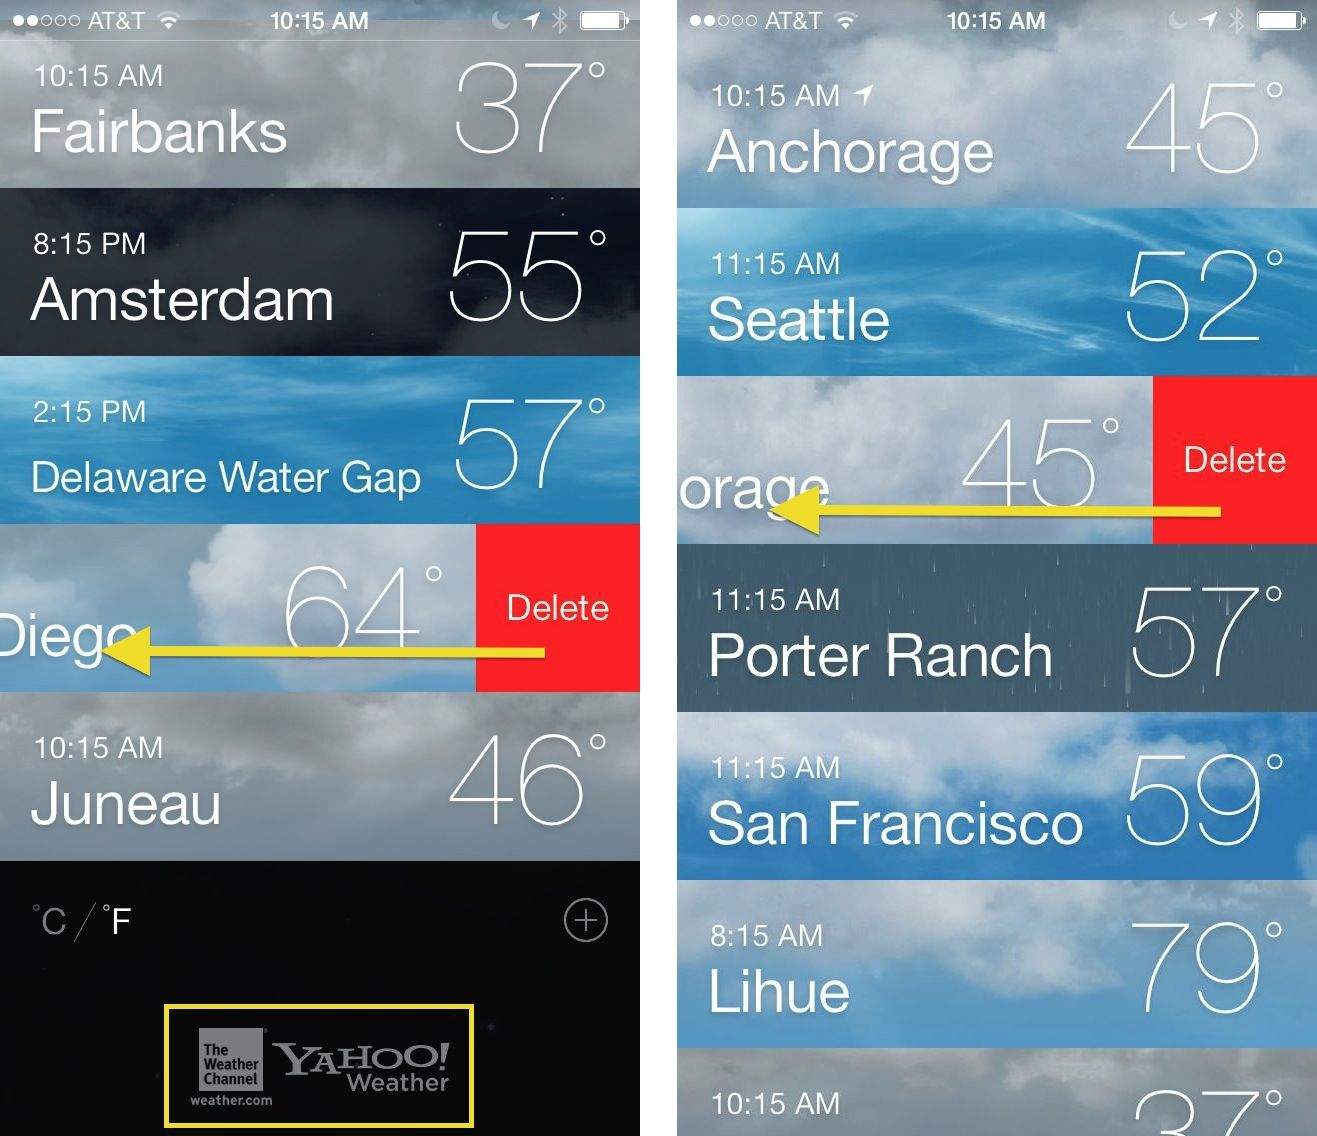 See All Your Locations At Once In The New iOS 7 Weather App [iOS Tips